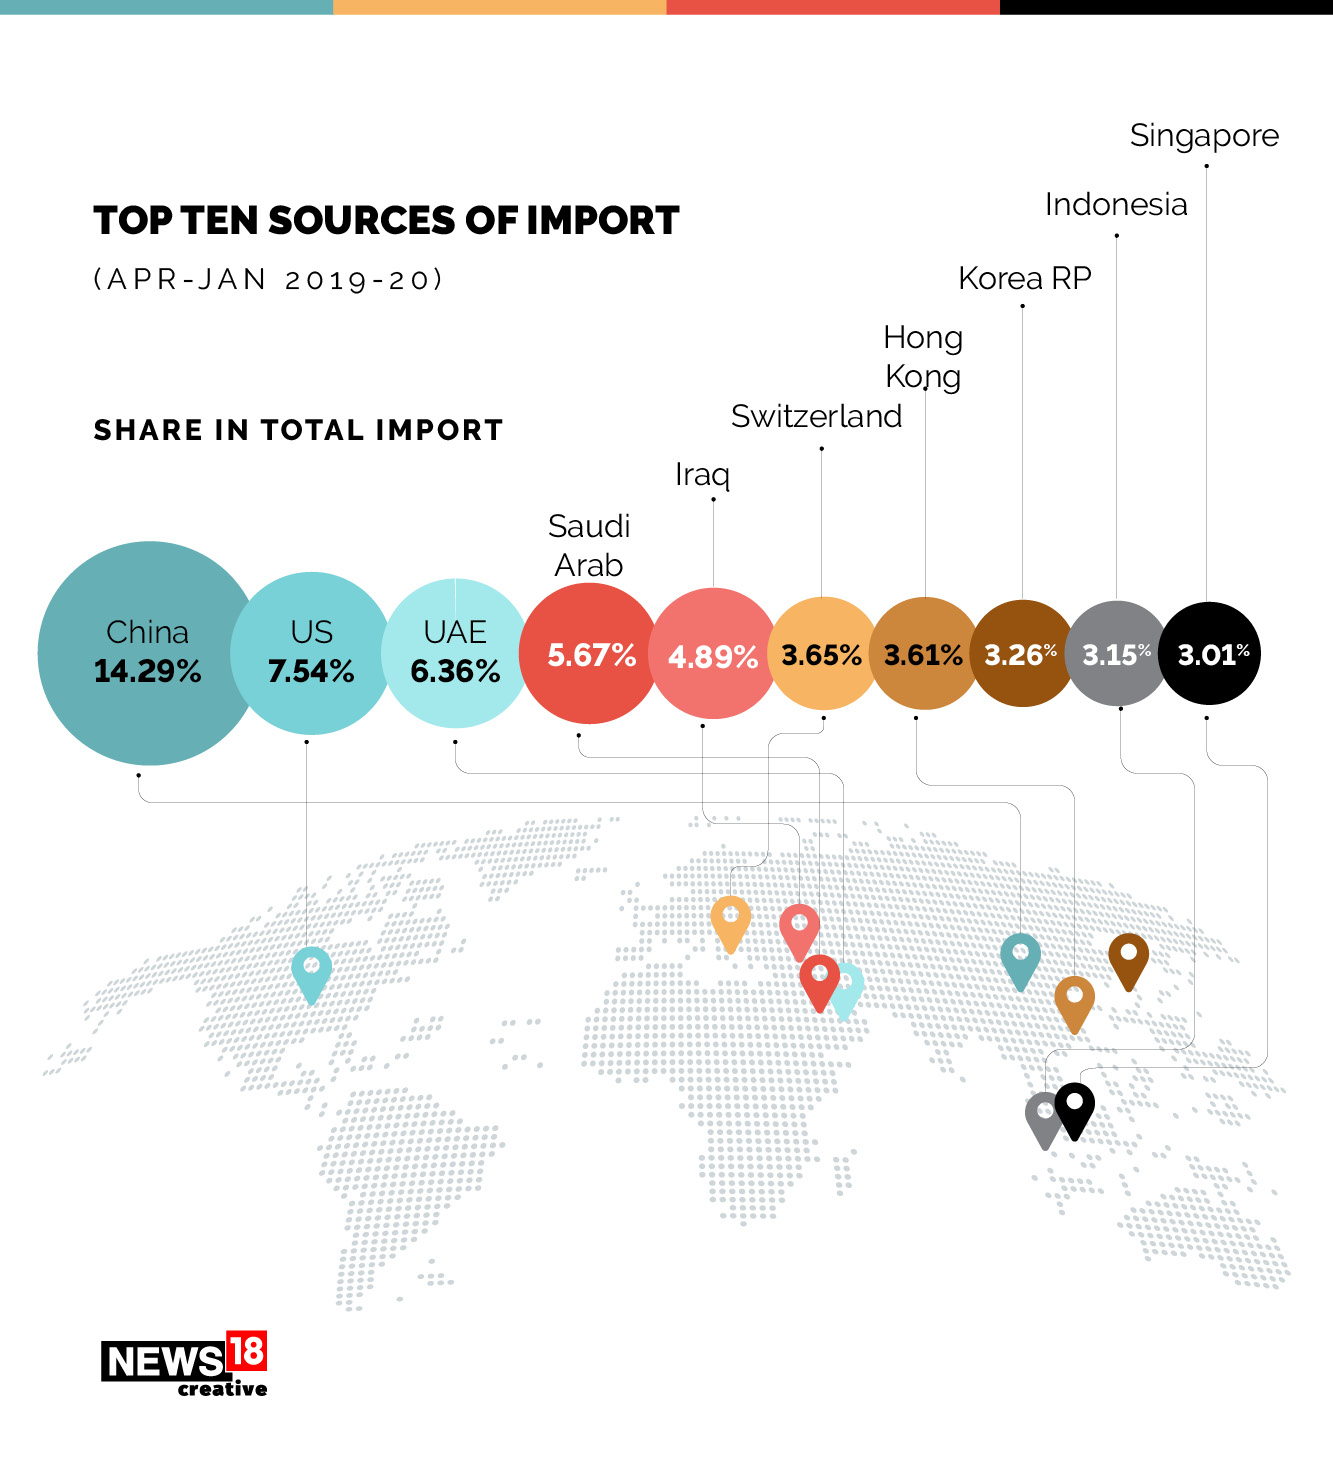 Share of Total Import of India from other Nations